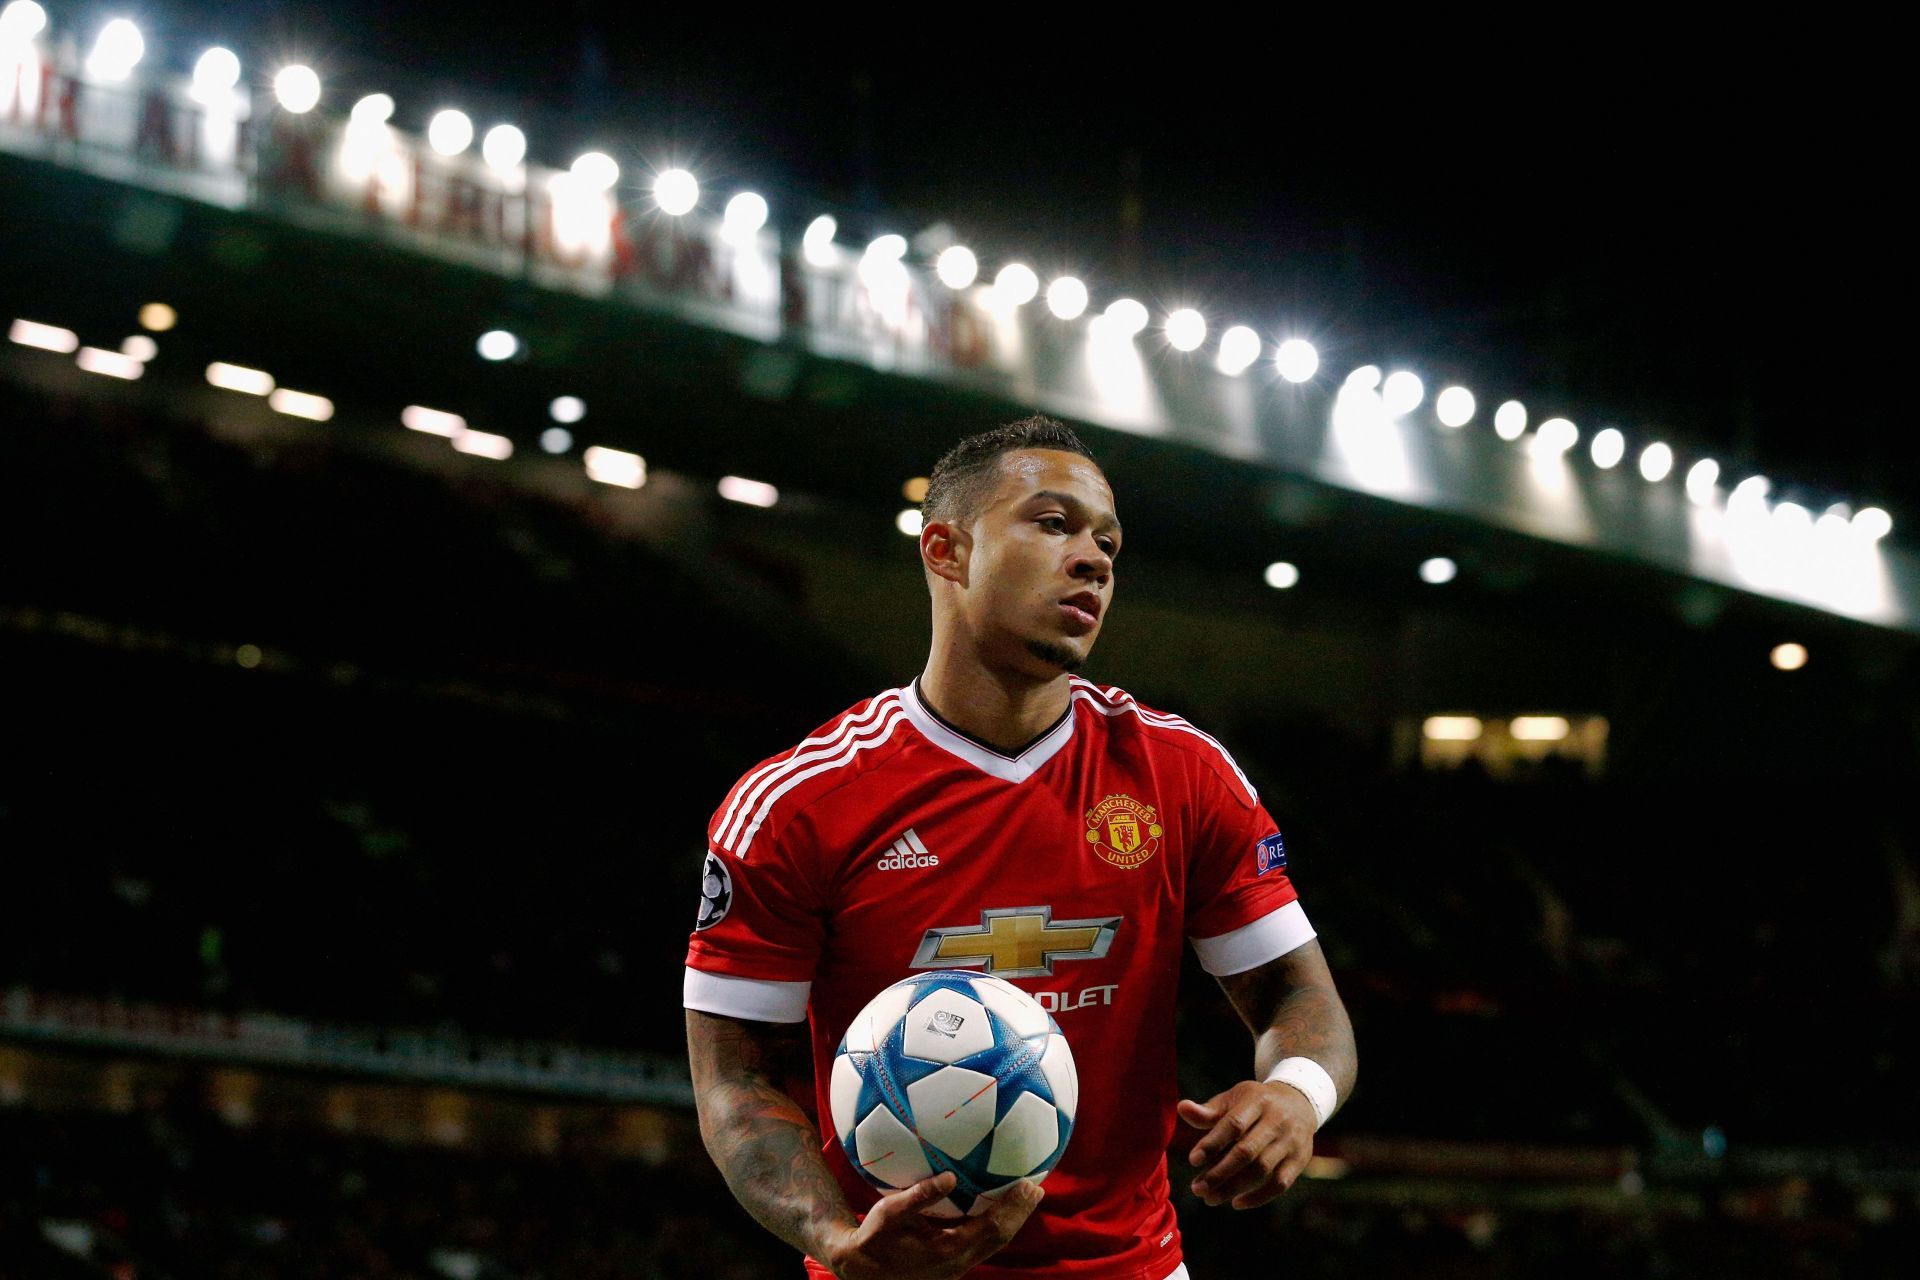 Memphis Depay could return to Manchester United this window